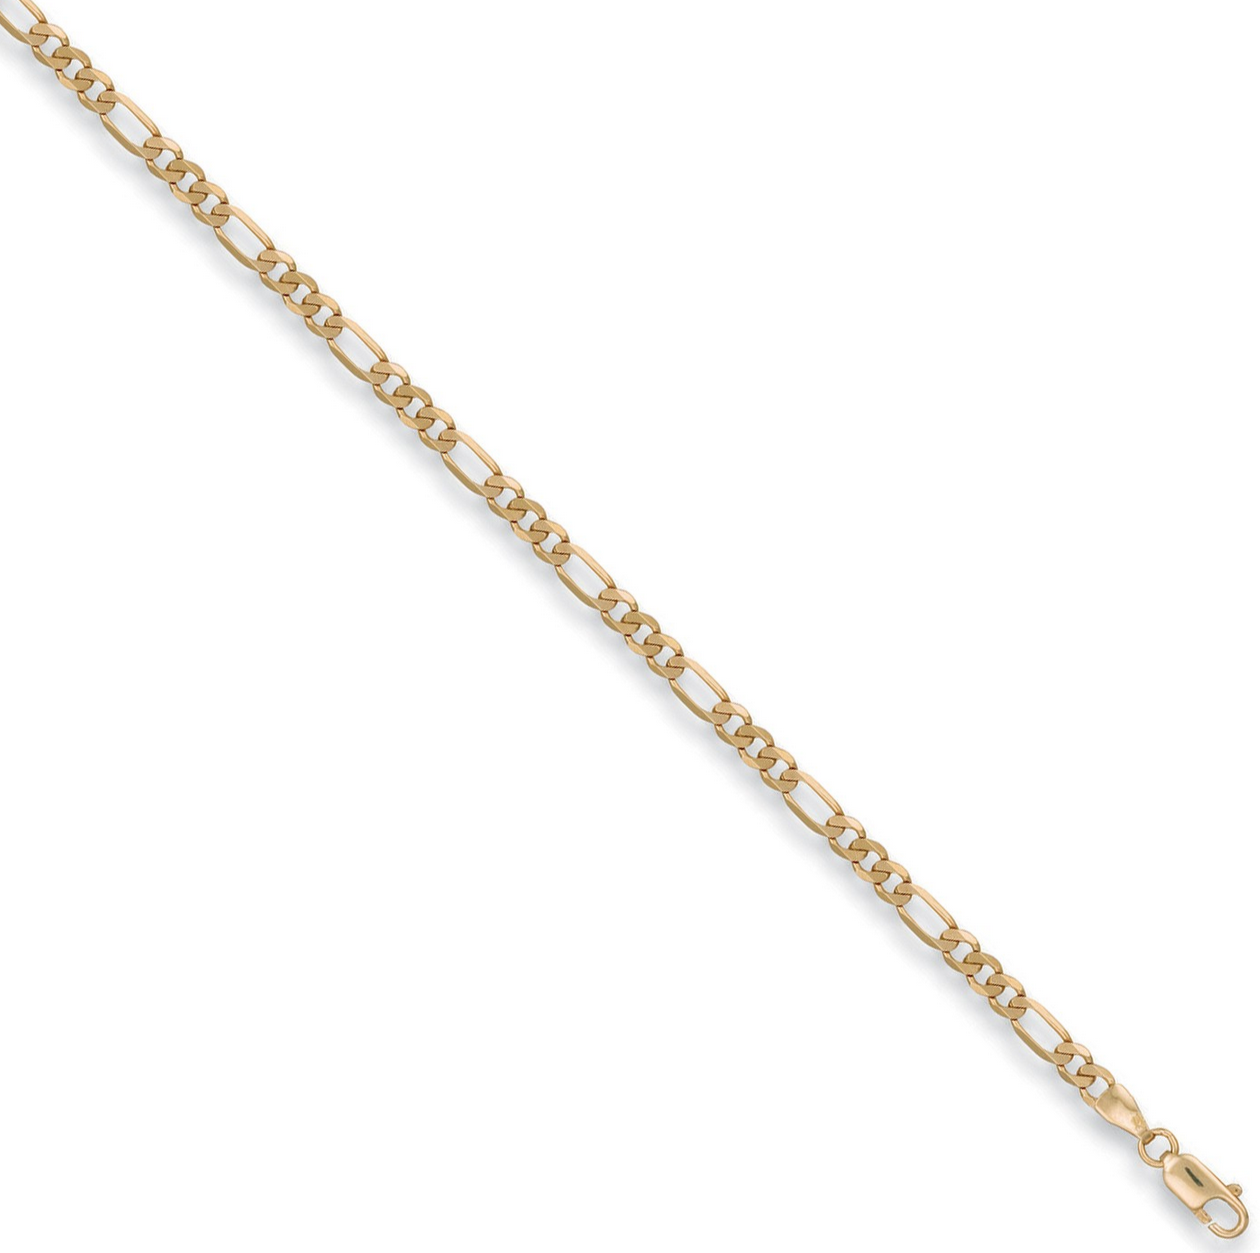 9ct Yellow Gold 3.8mm Figaro 3+1 Link Bracelet Chain (0004)